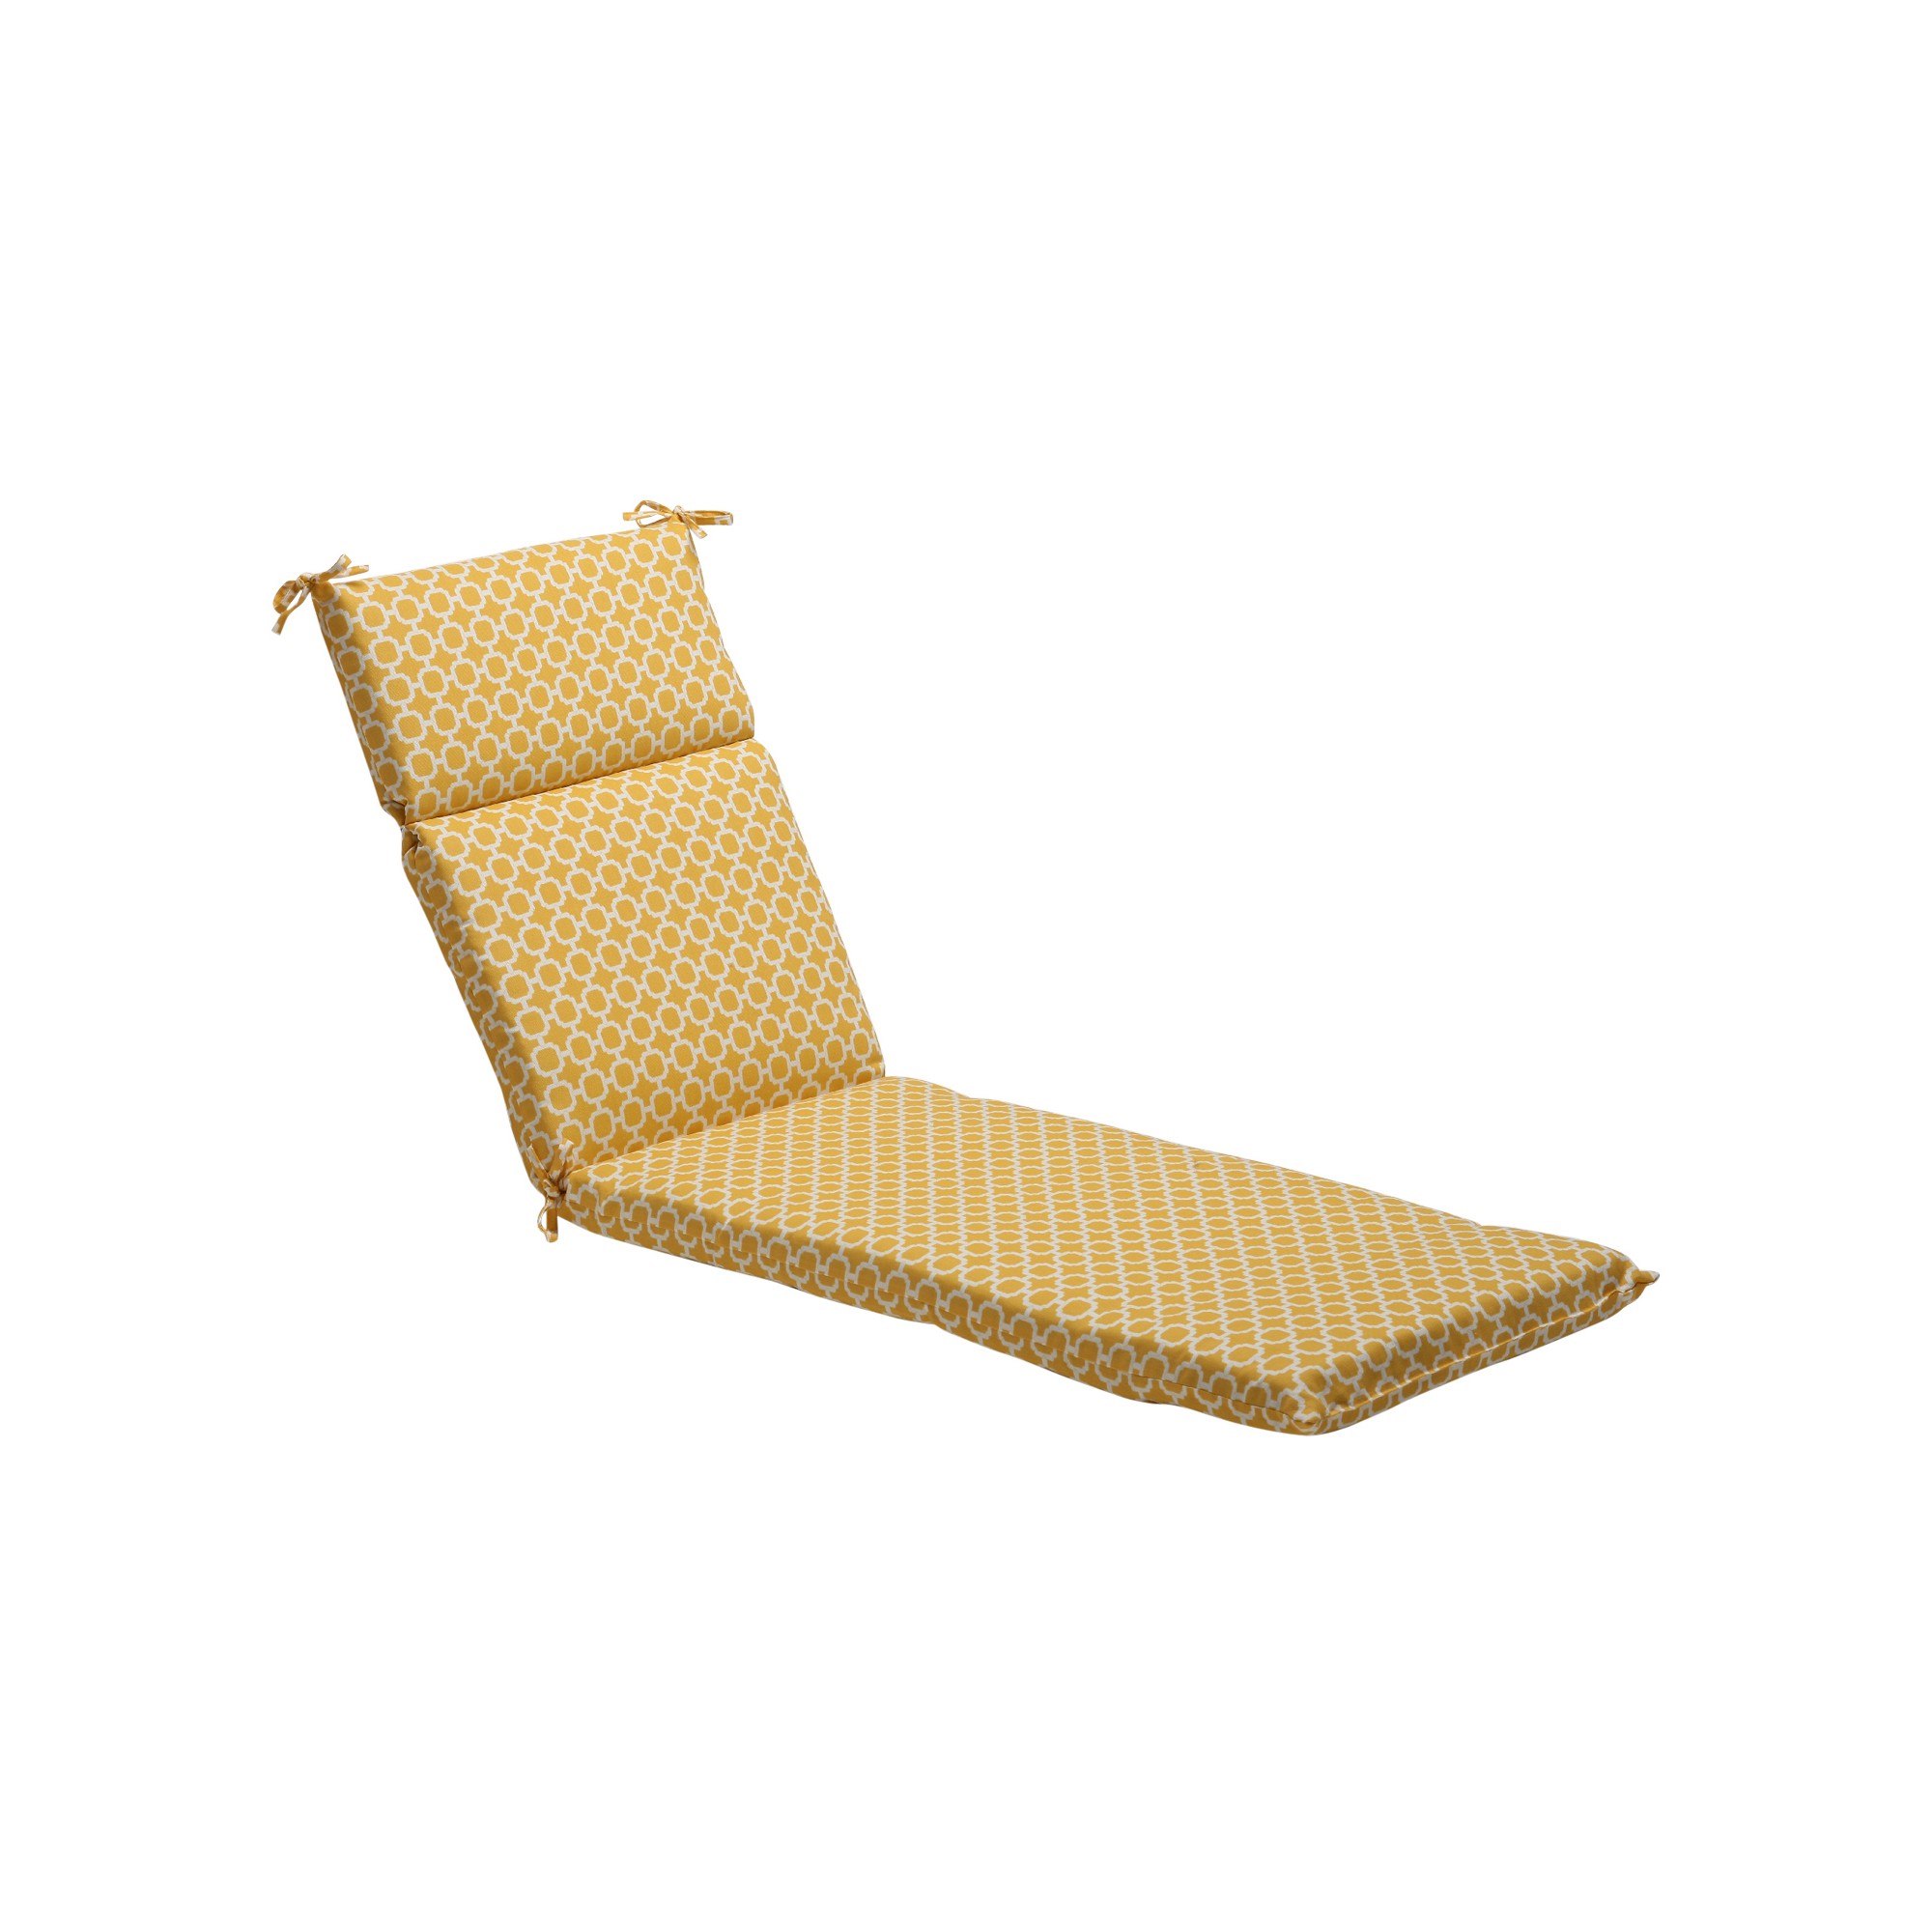 Outdoor Chaise Lounge Cushion - Yellow/White Geometric - Pillow Perfect